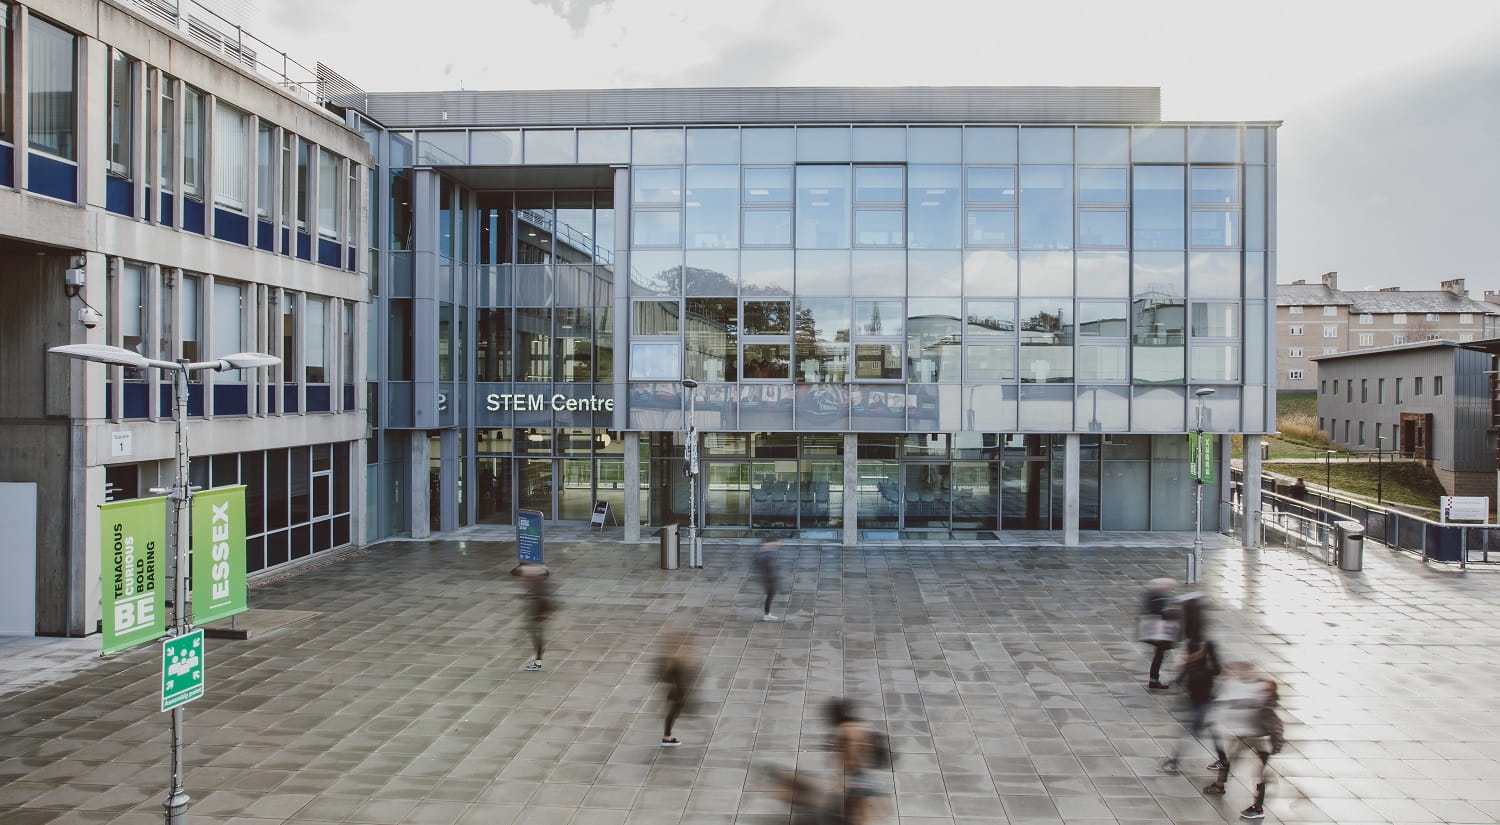 A long-exposure shot of the front of the STEM Centre on Colchester campus. A series of blurry figures are crossing the square in front, going in different directions.